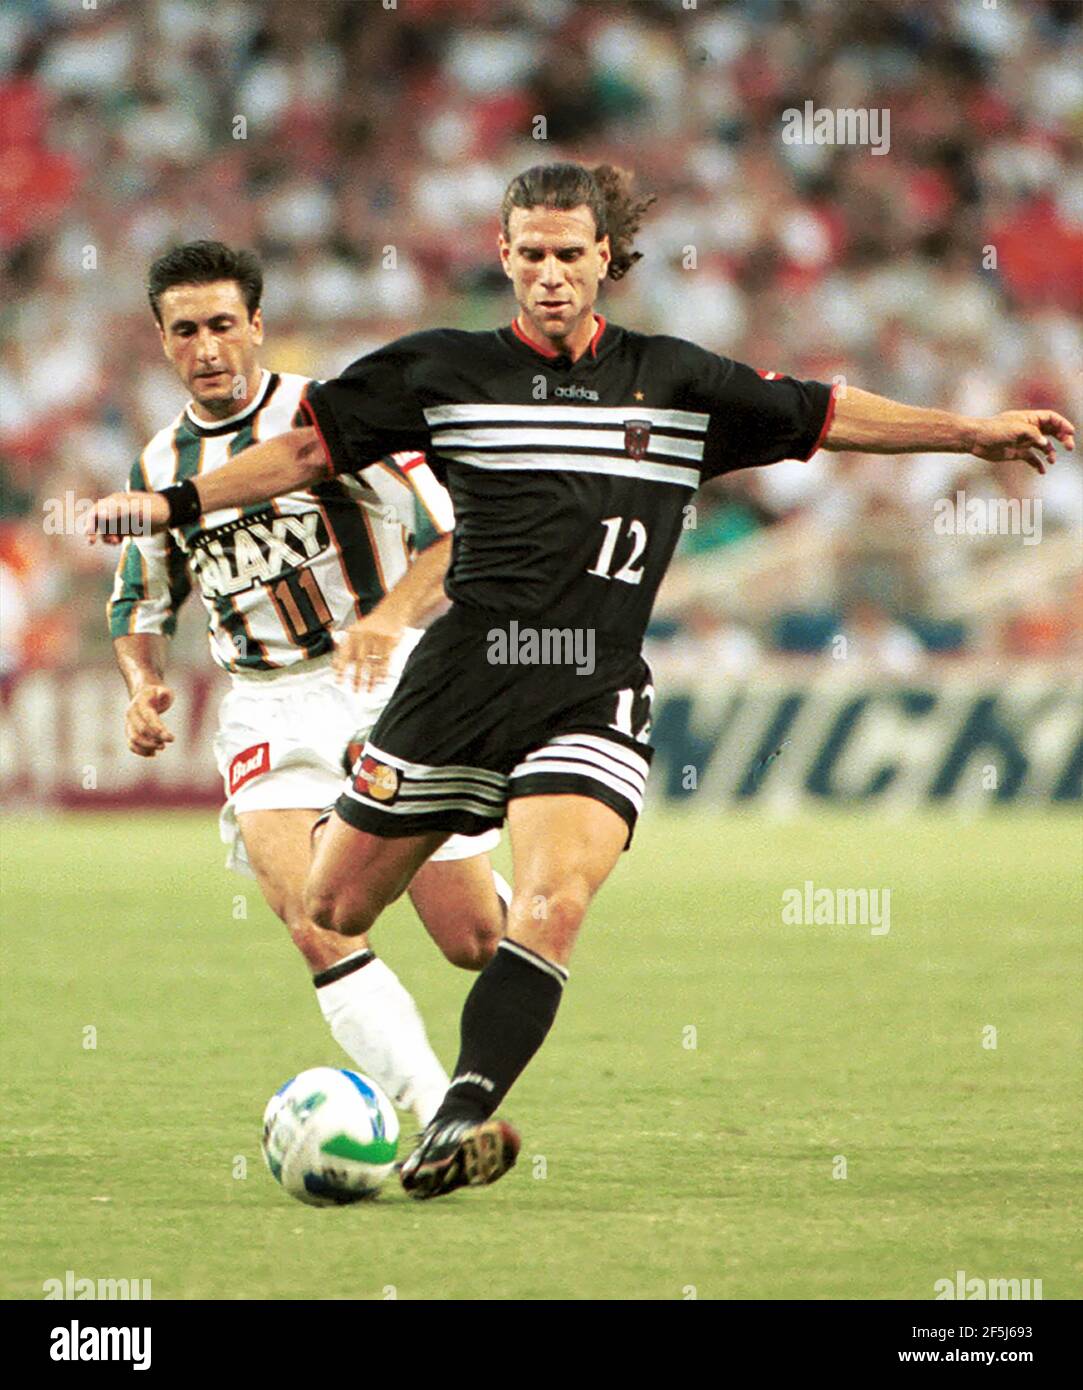 Jeff Agoos of D.C. United in action Stock Photo